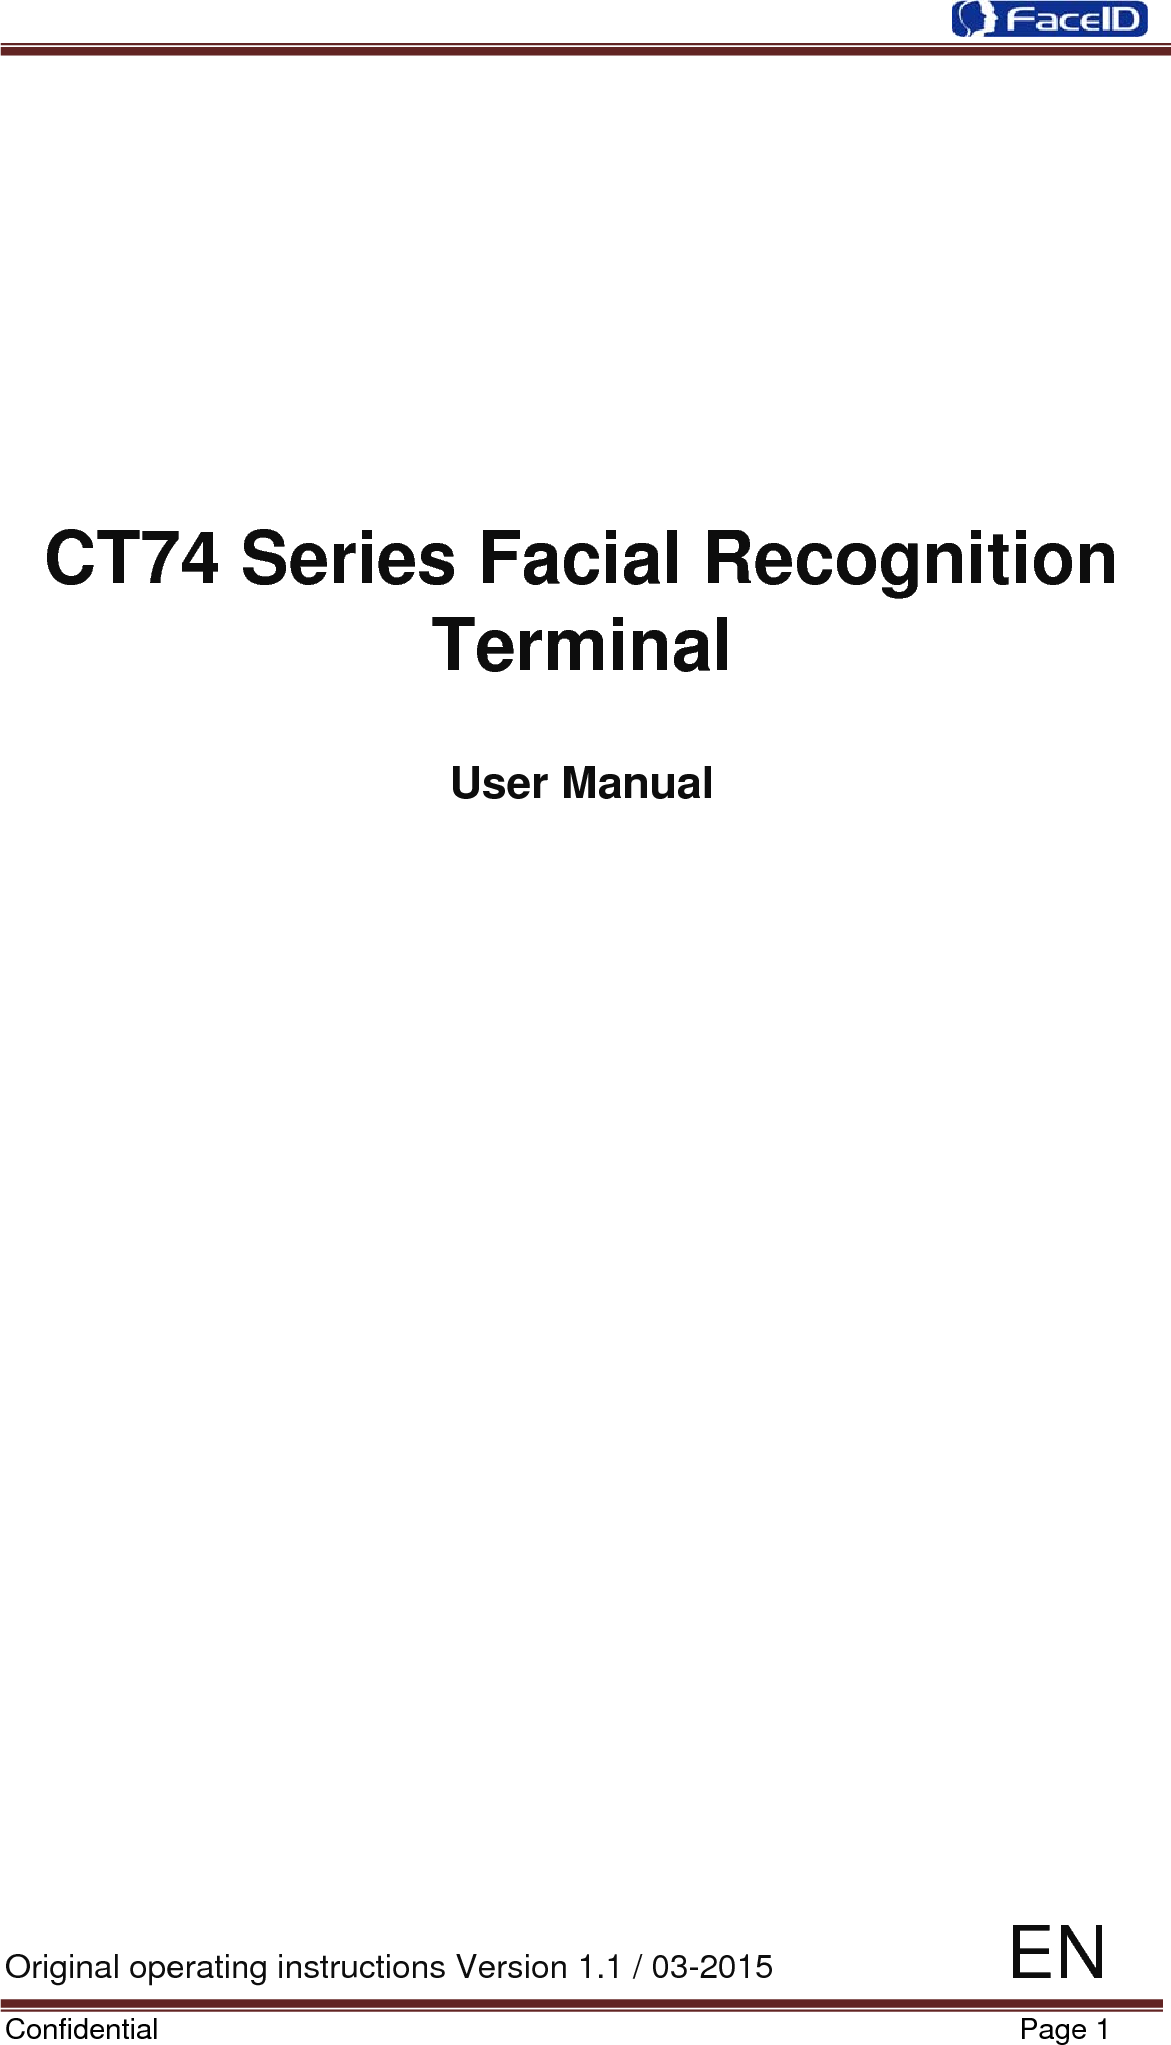  Confidential                                                           Page 1           CT74 Series Facial Recognition Terminal  User Manual                          Original operating instructions Version 1.1 / 03-2015              EN 